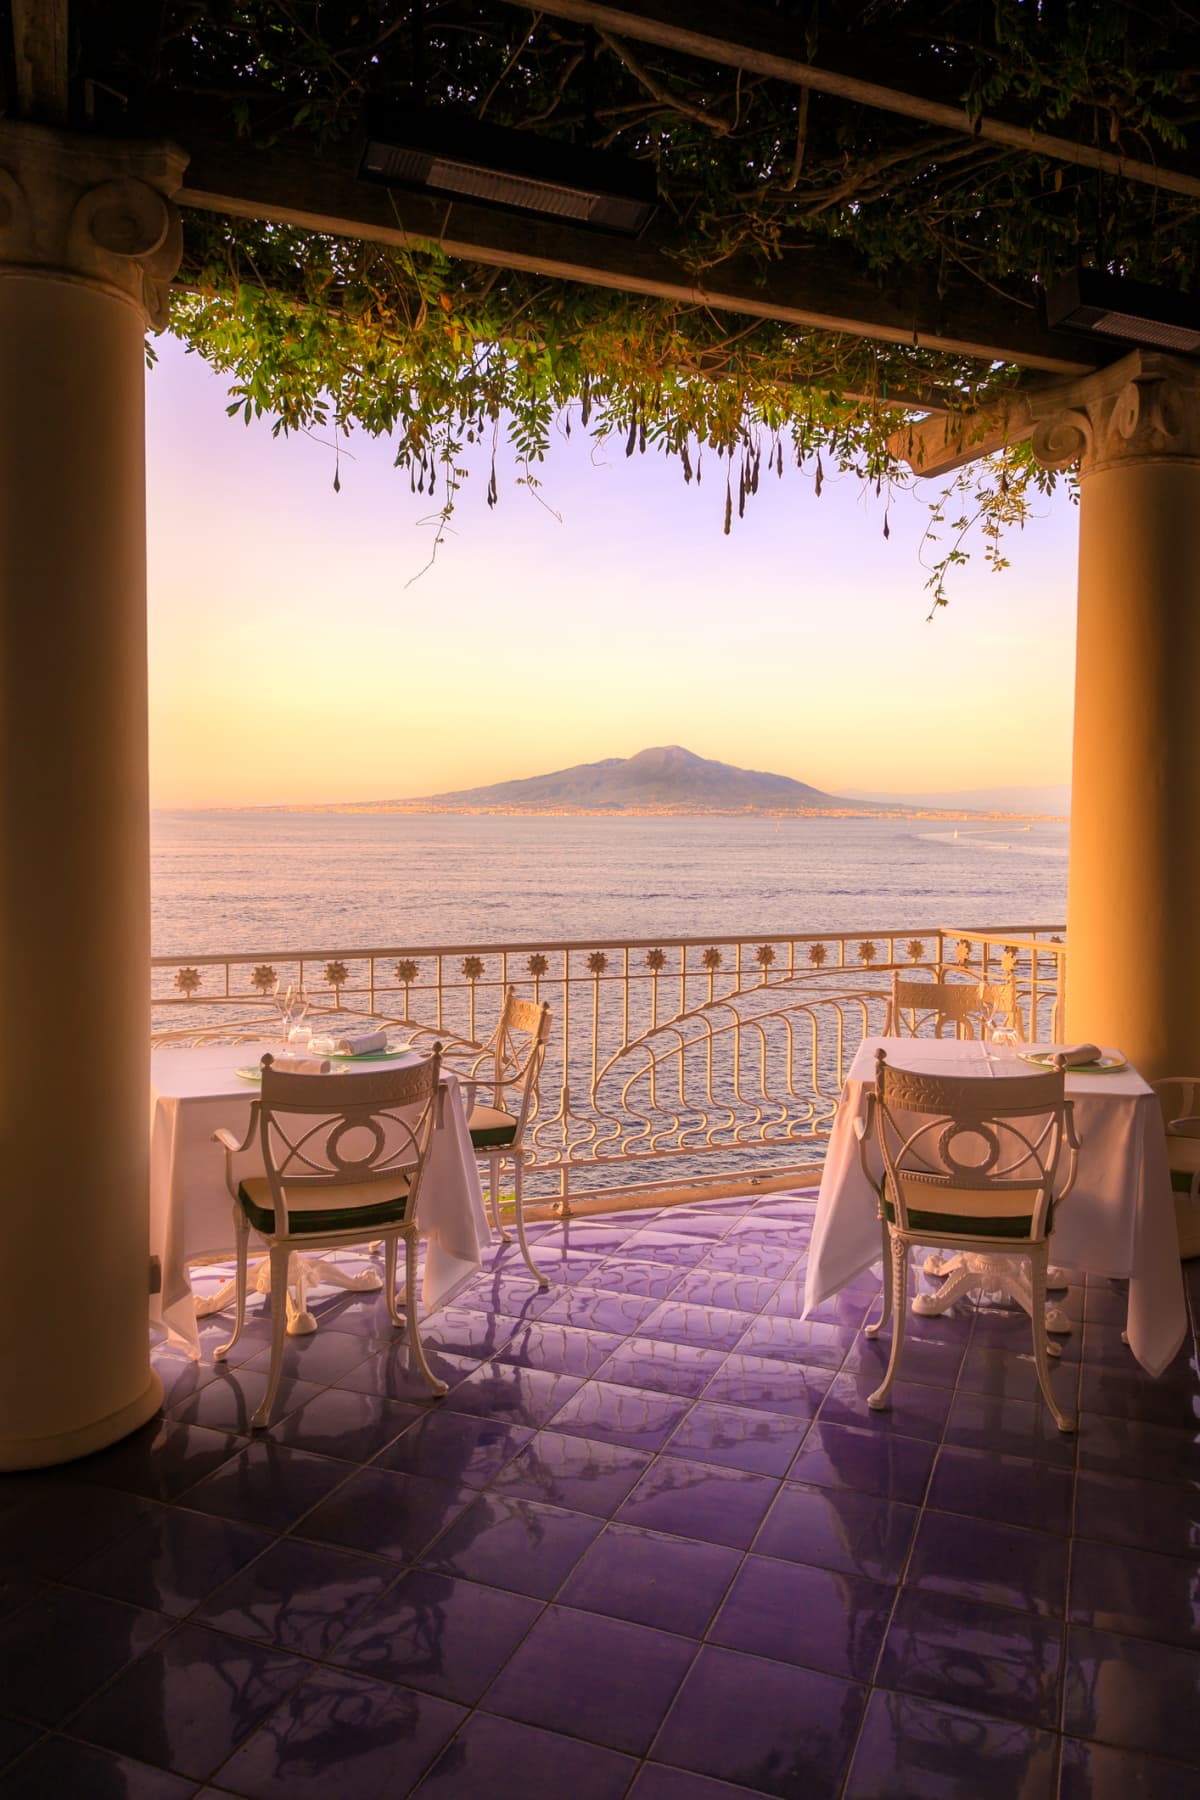 A restaurant terrace in Italy over looking the ocean